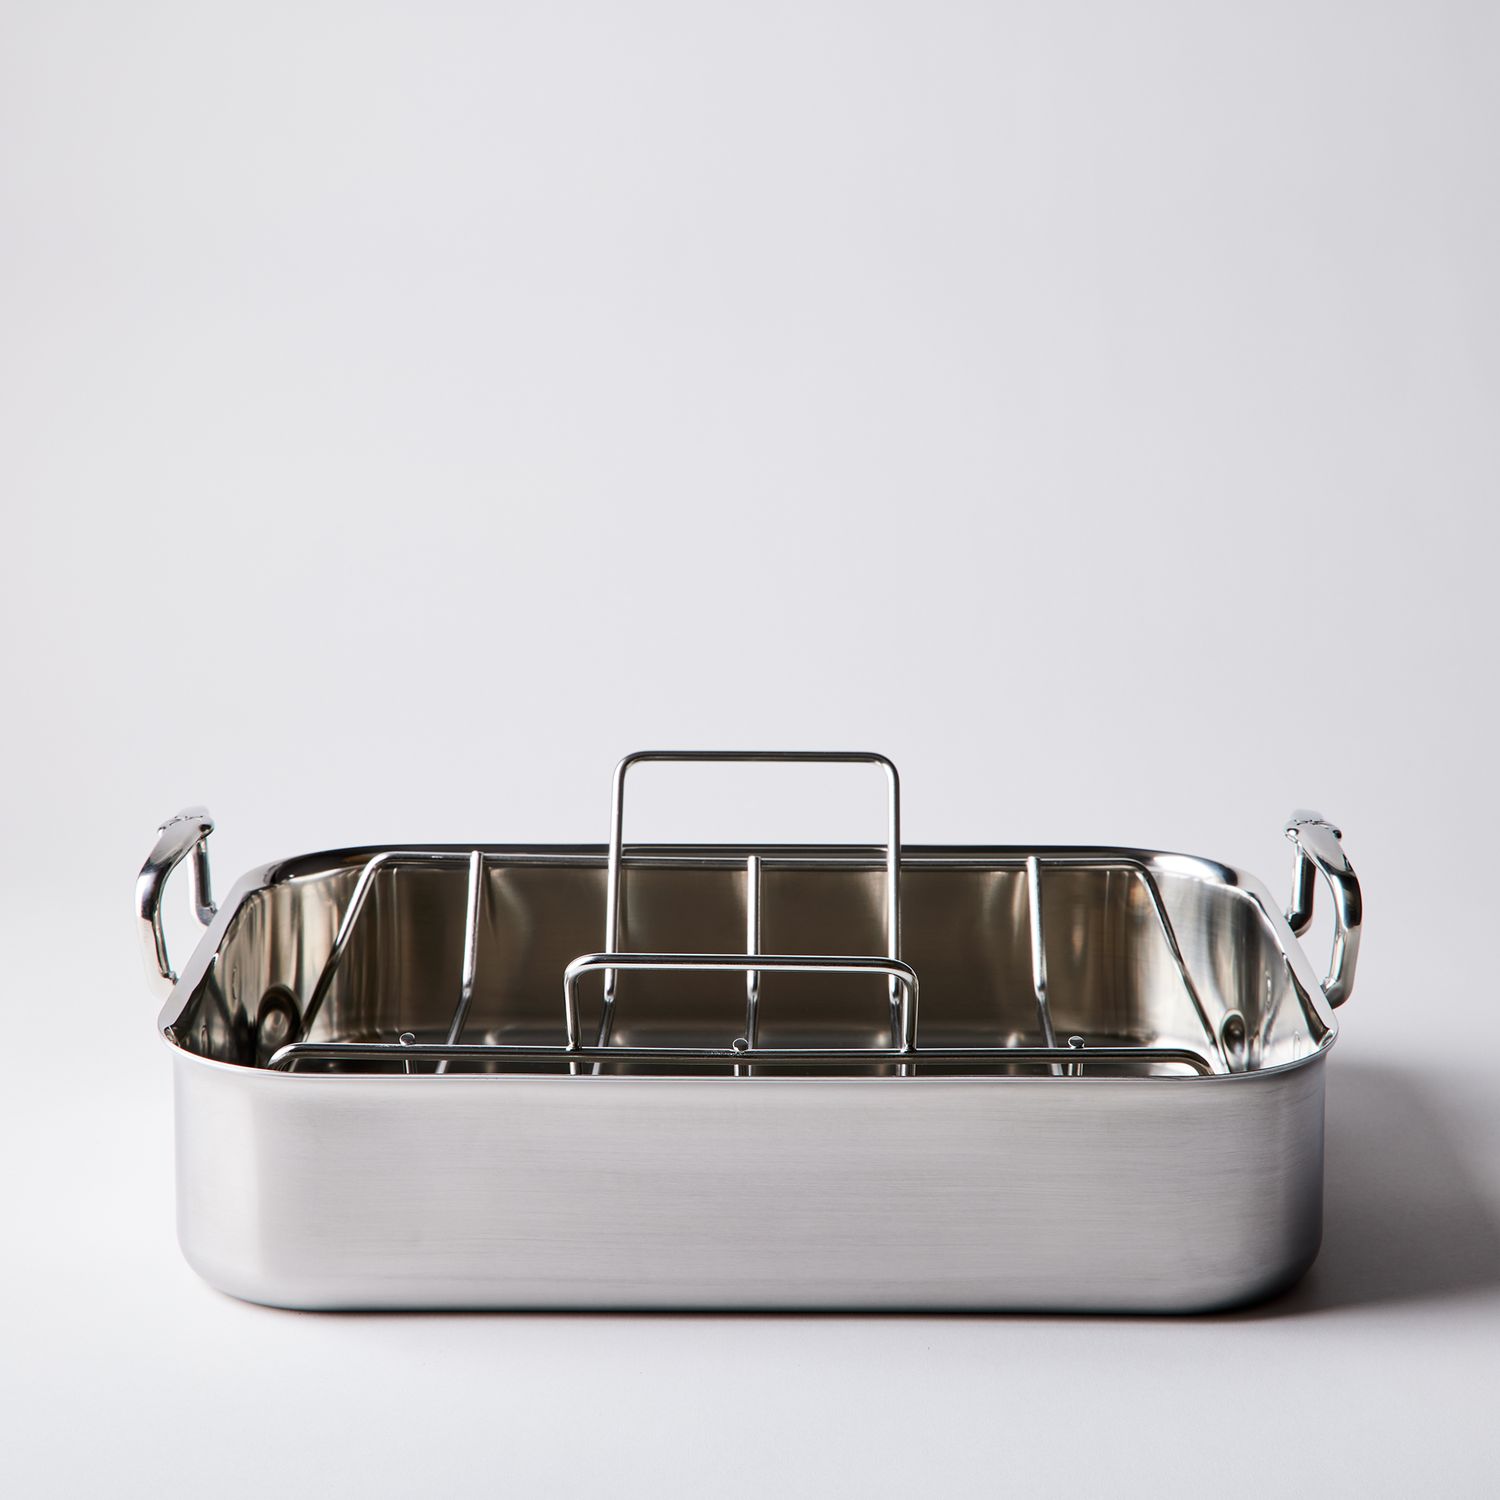 Hestan Provisions Classic Roaster with Rack, 14.5” or 16.5